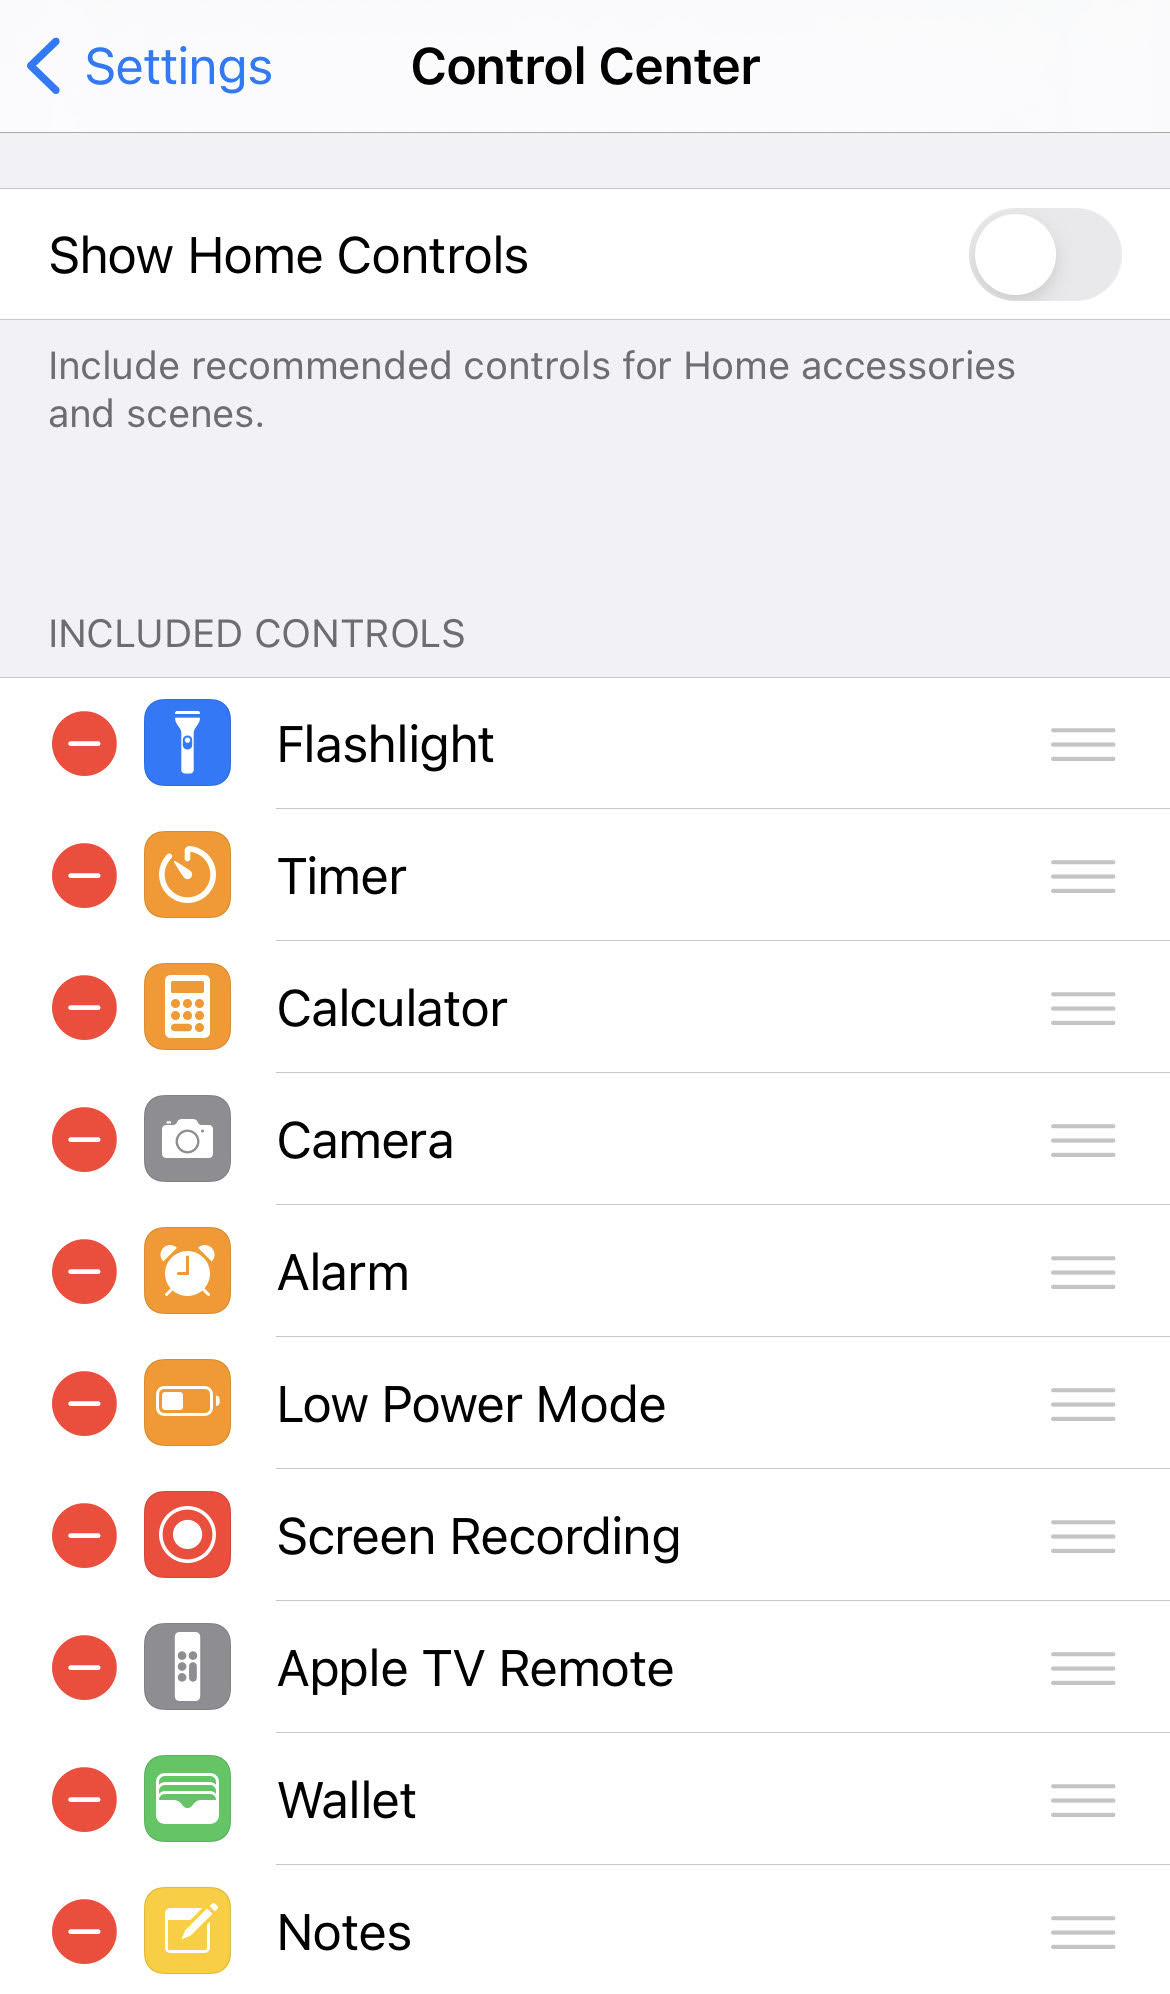 how to add screen record on iphone